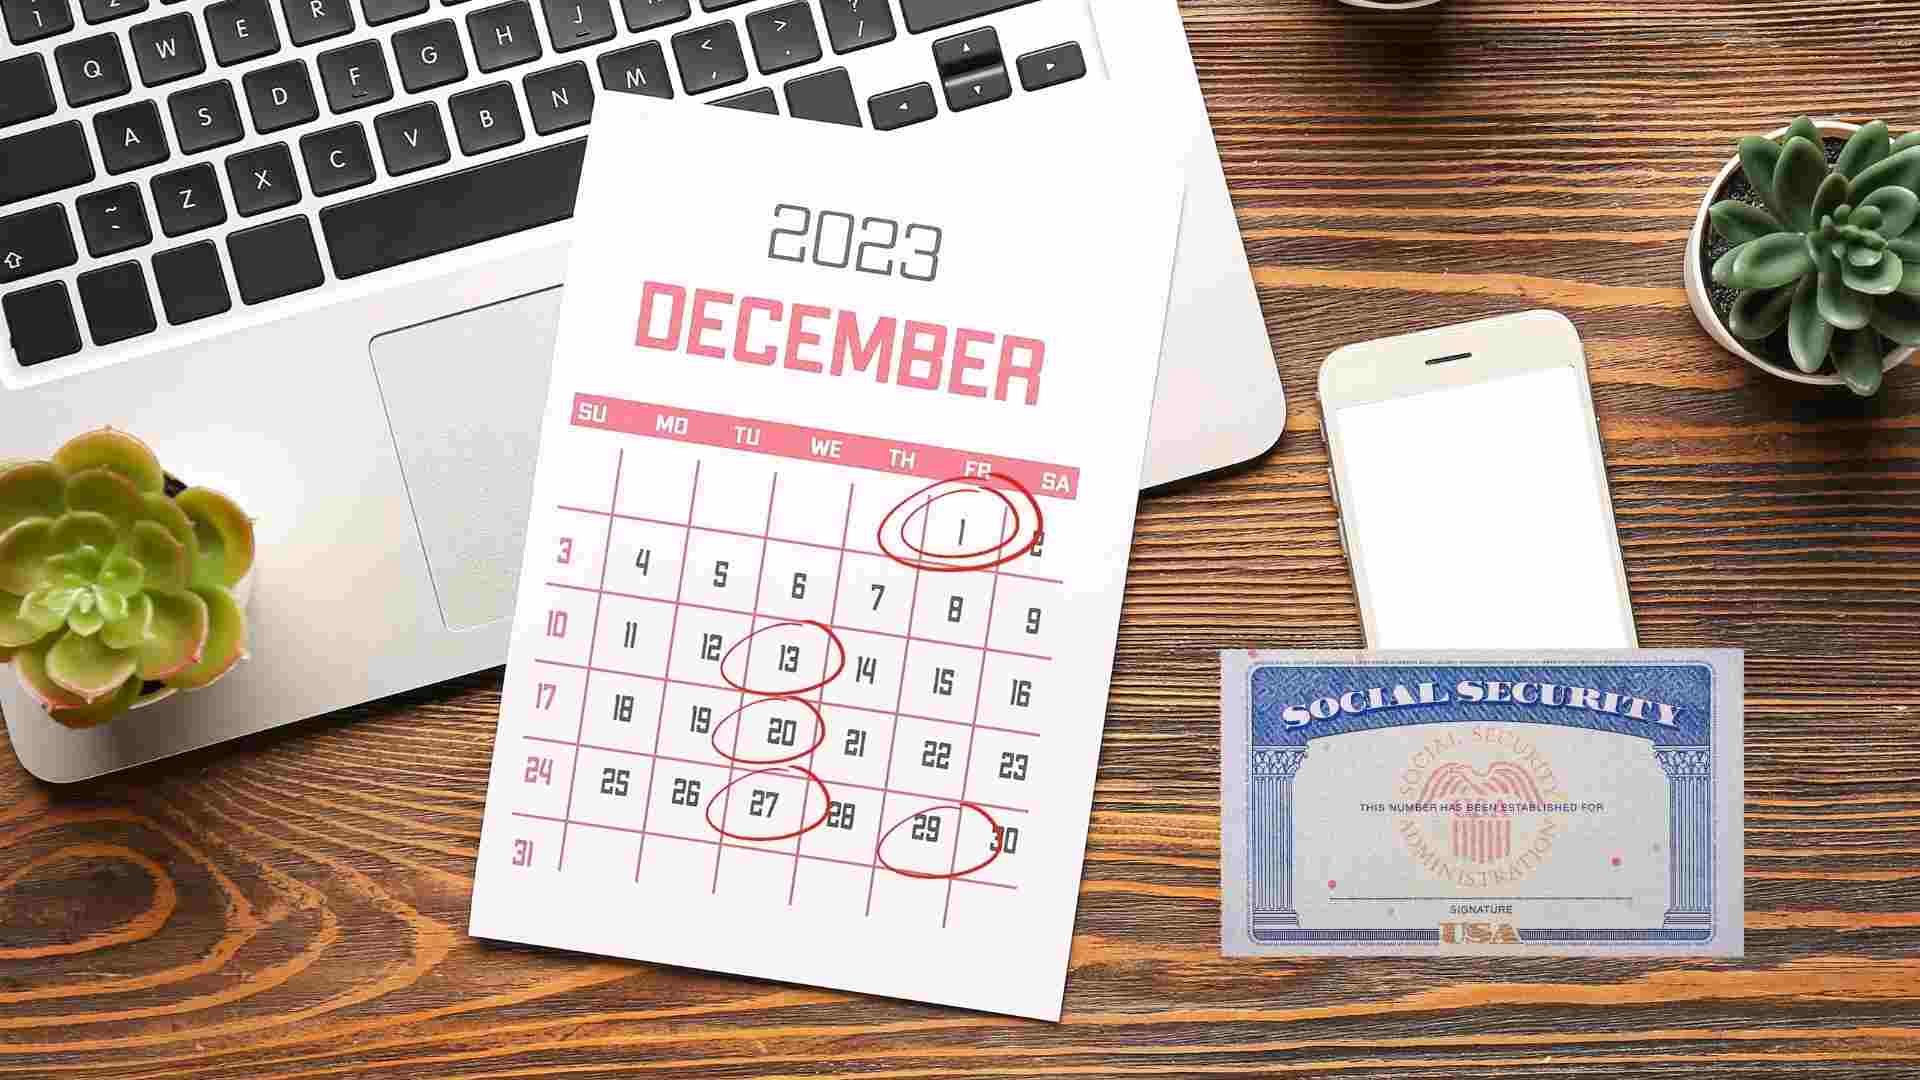 SSA card, calendar and laptop for Social Security, SSA payments in December and unexpected benefits and paydays